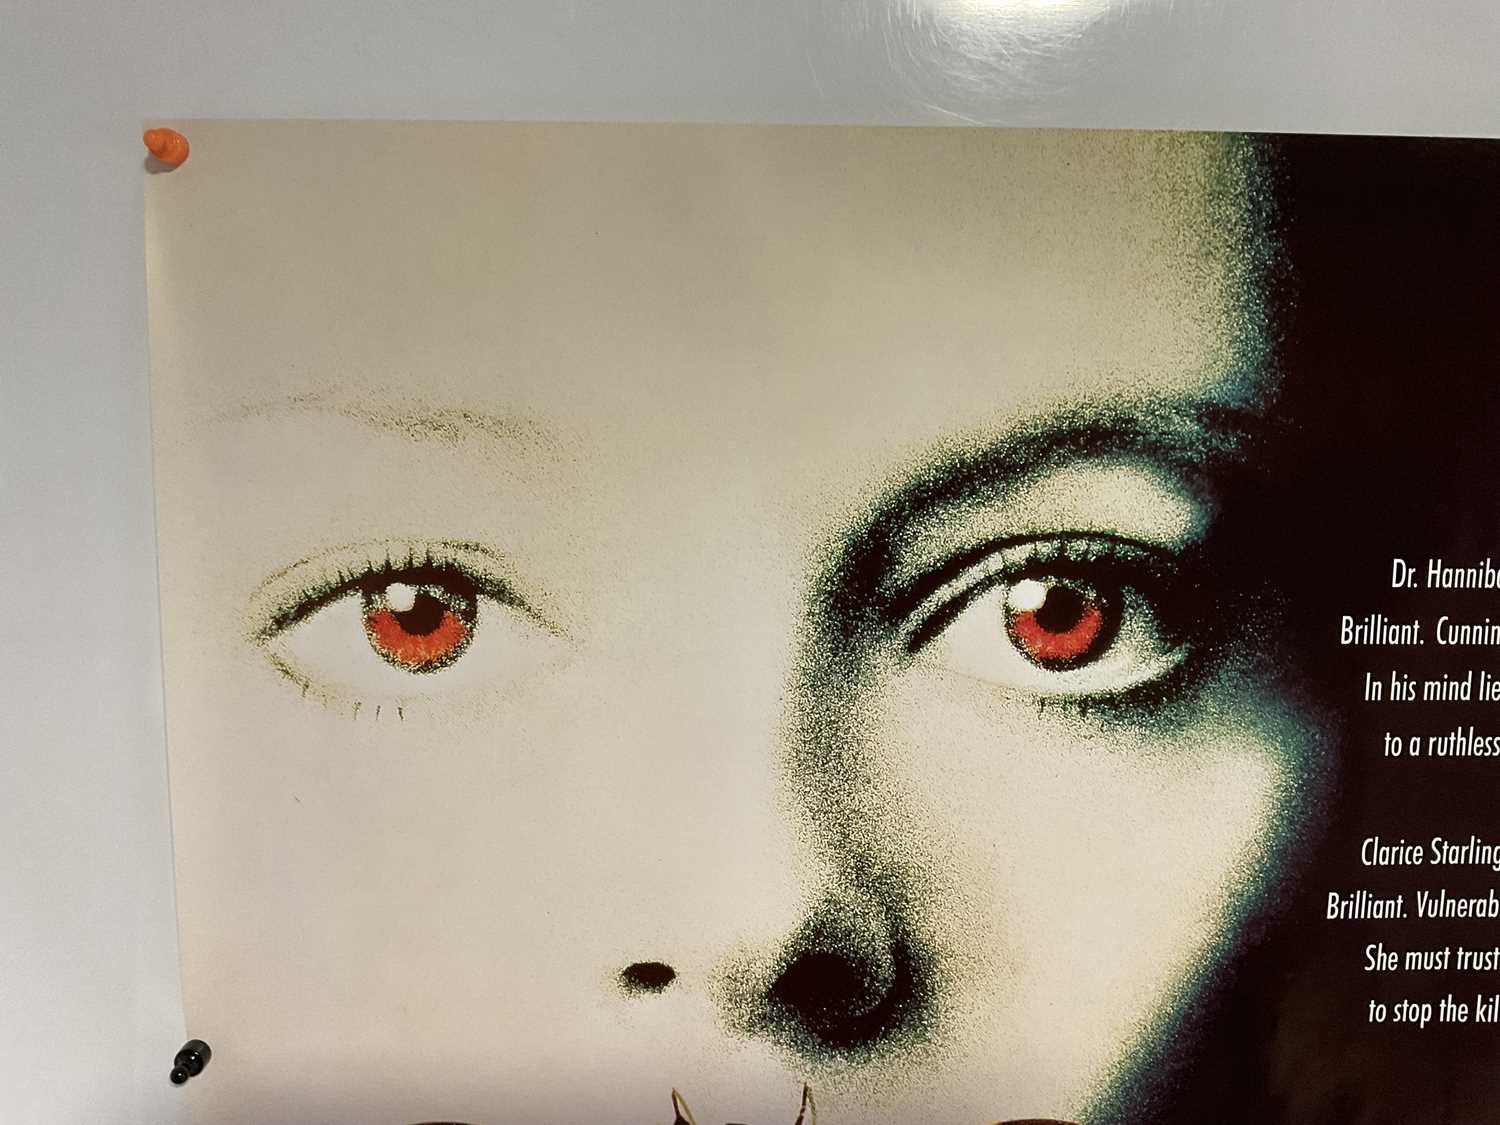 SILENCE OF THE LAMBS (1990) UK Quad film poster, classic horror movie starring Jodie Foster and - Image 3 of 5